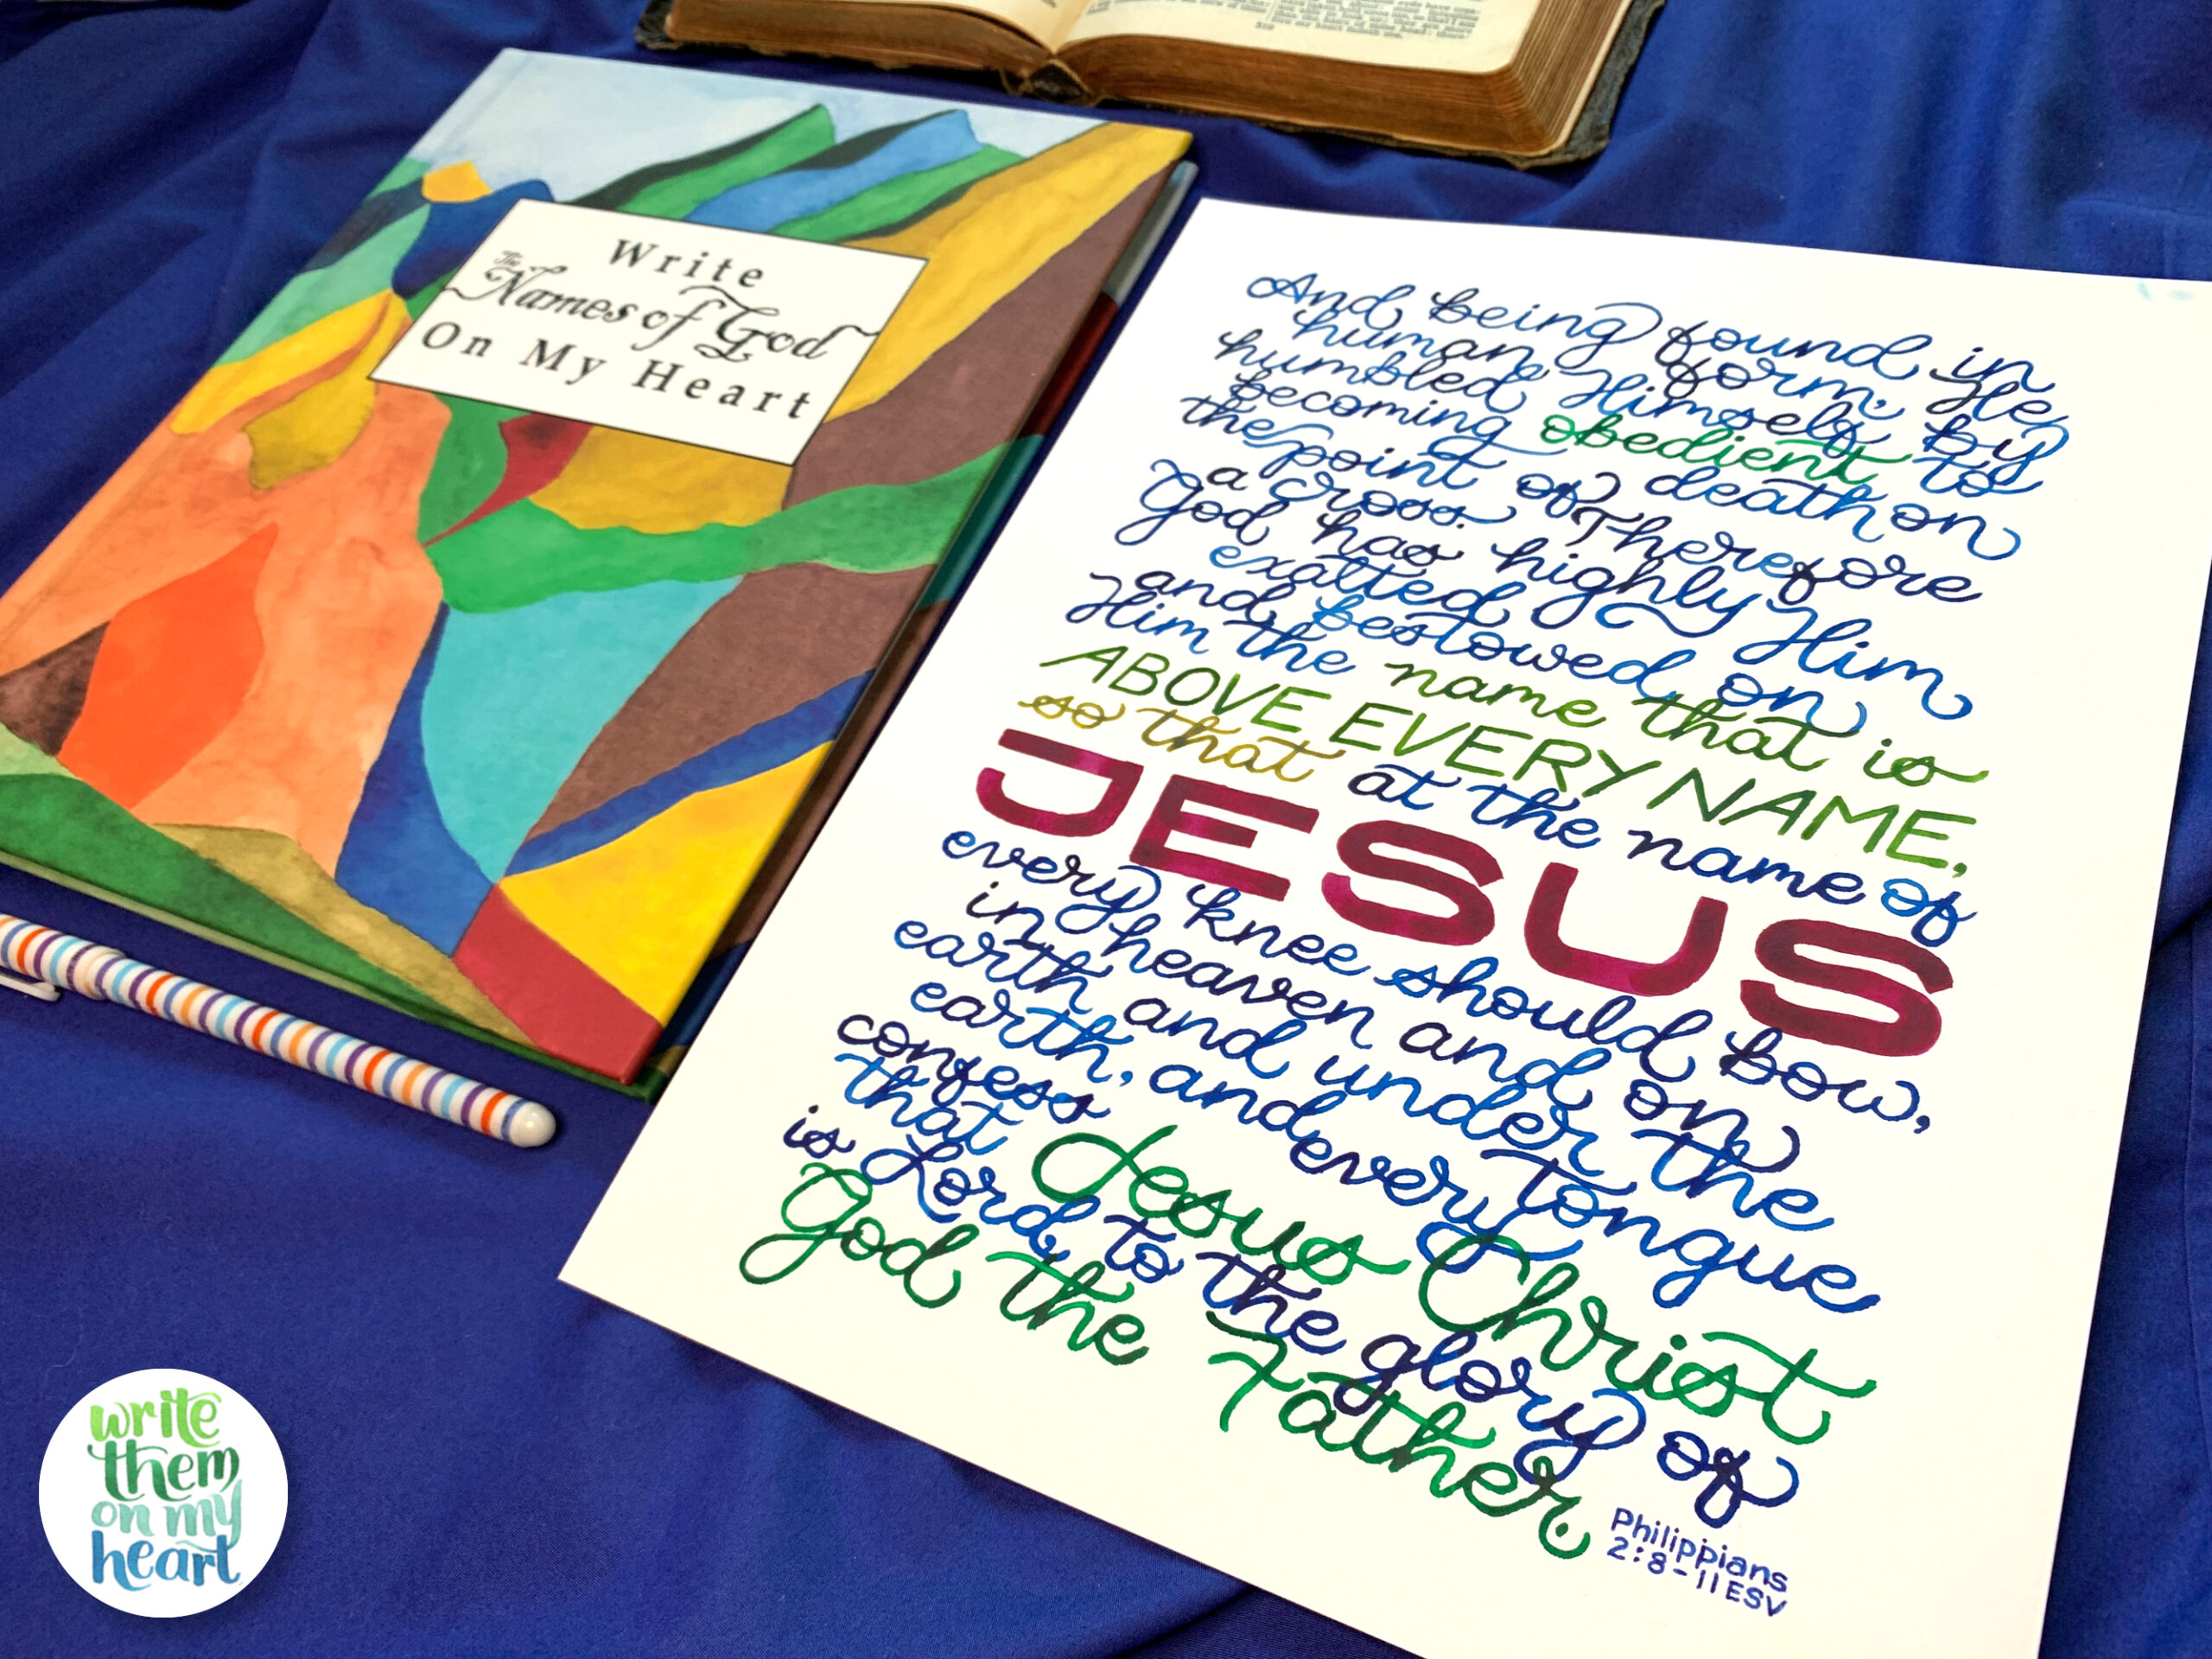 Write The Names of God On My Heart journal and Scripture Art of Philippians 2:8-11.